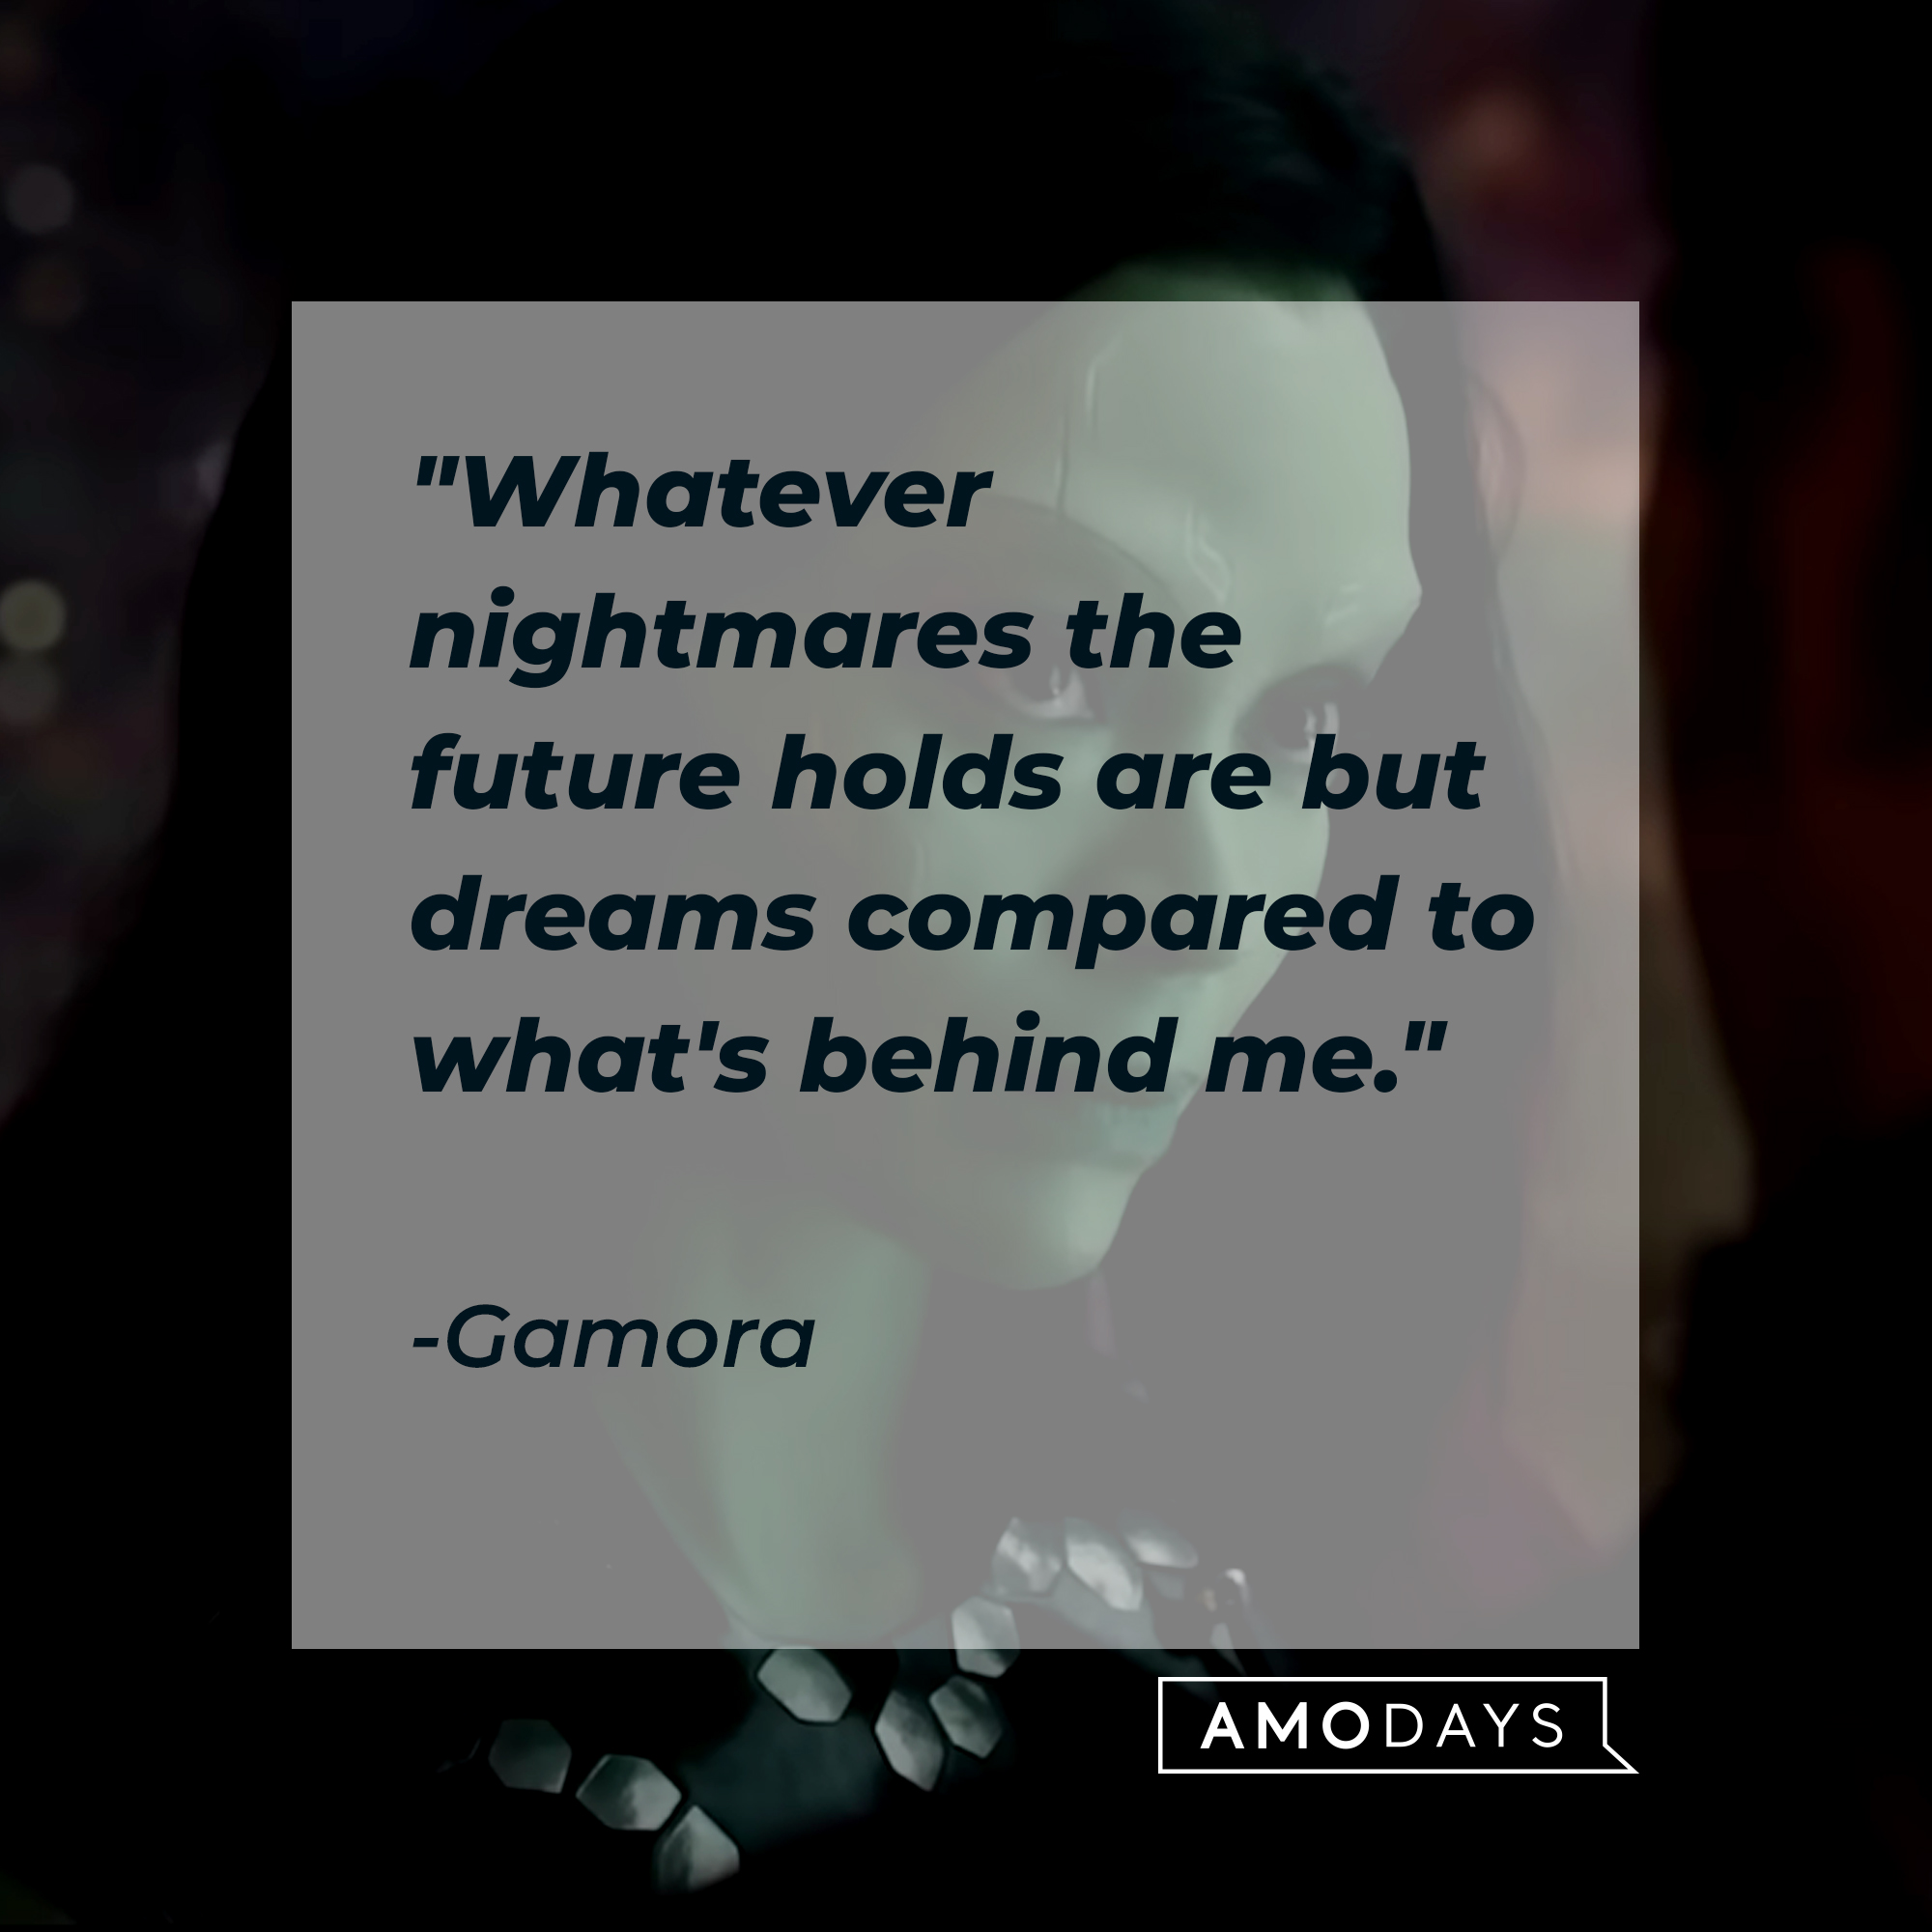 Gamora's quote, "Whatever nightmares the future holds are but dreams compared to what's behind me." | Image: youtube.com/marvel